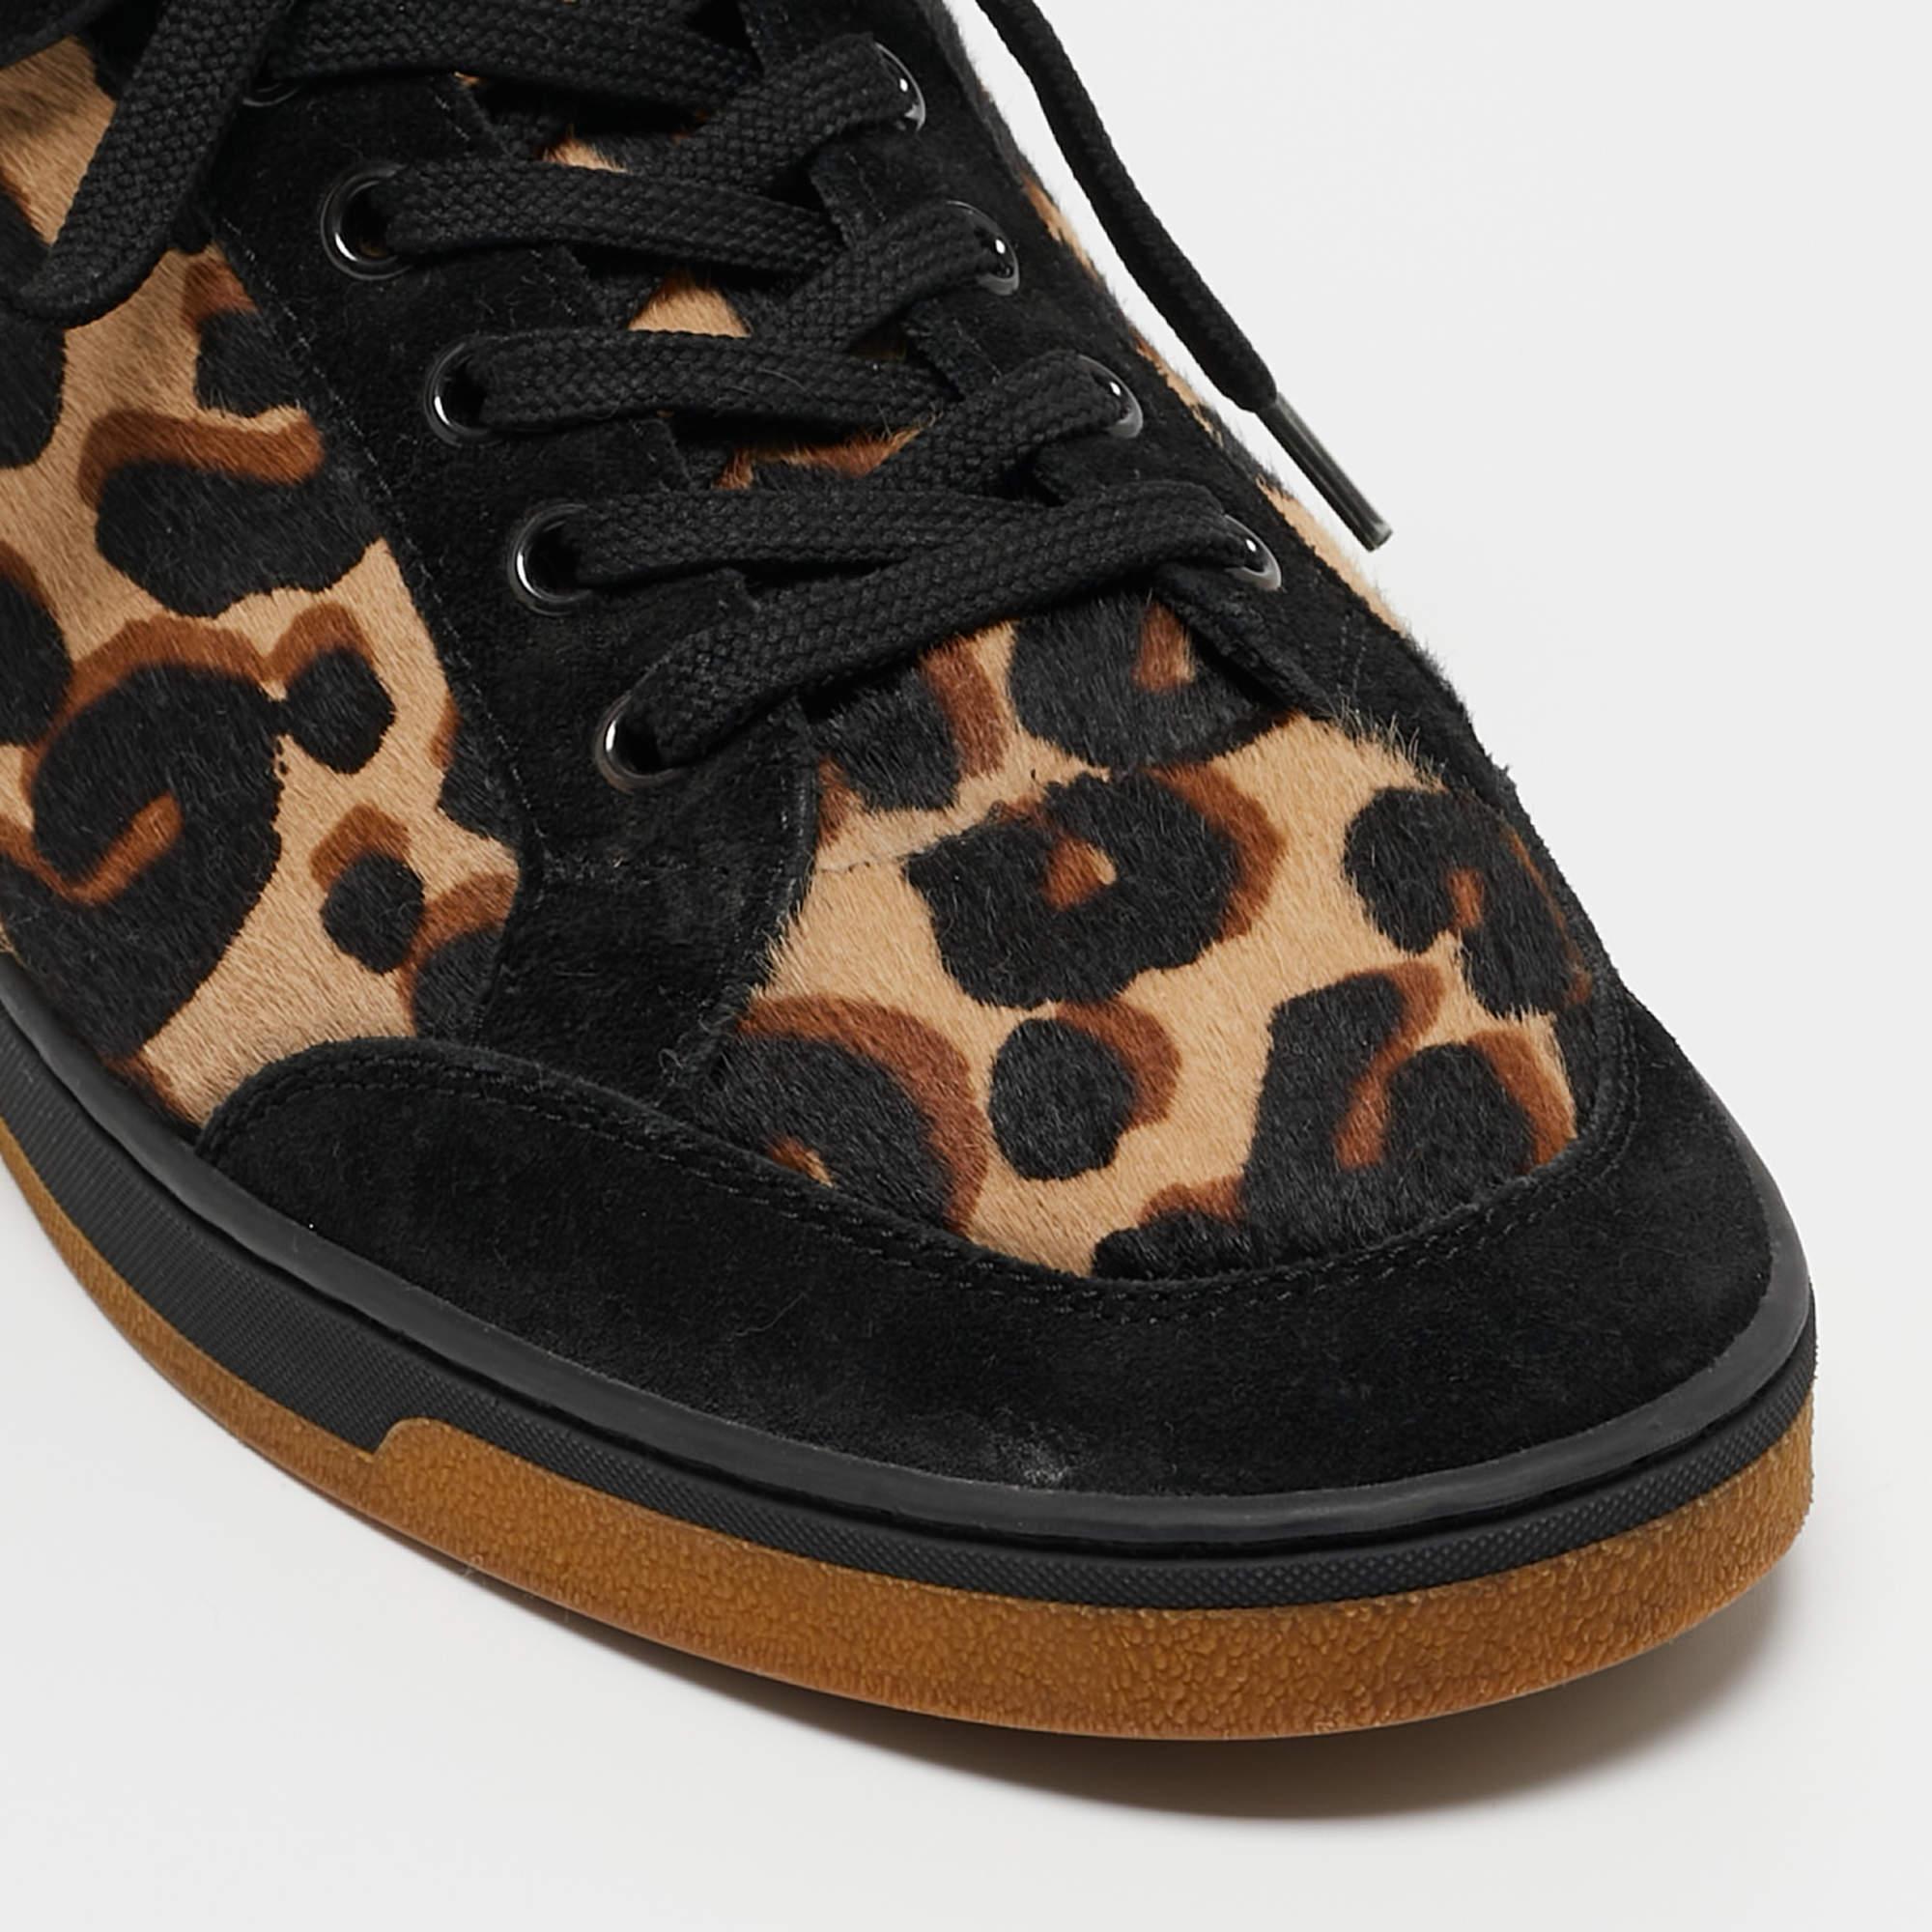 Women's Louis Vuitton Black/Brown Calf Hair and Suede Low Top Sneakers Size 38.5 For Sale